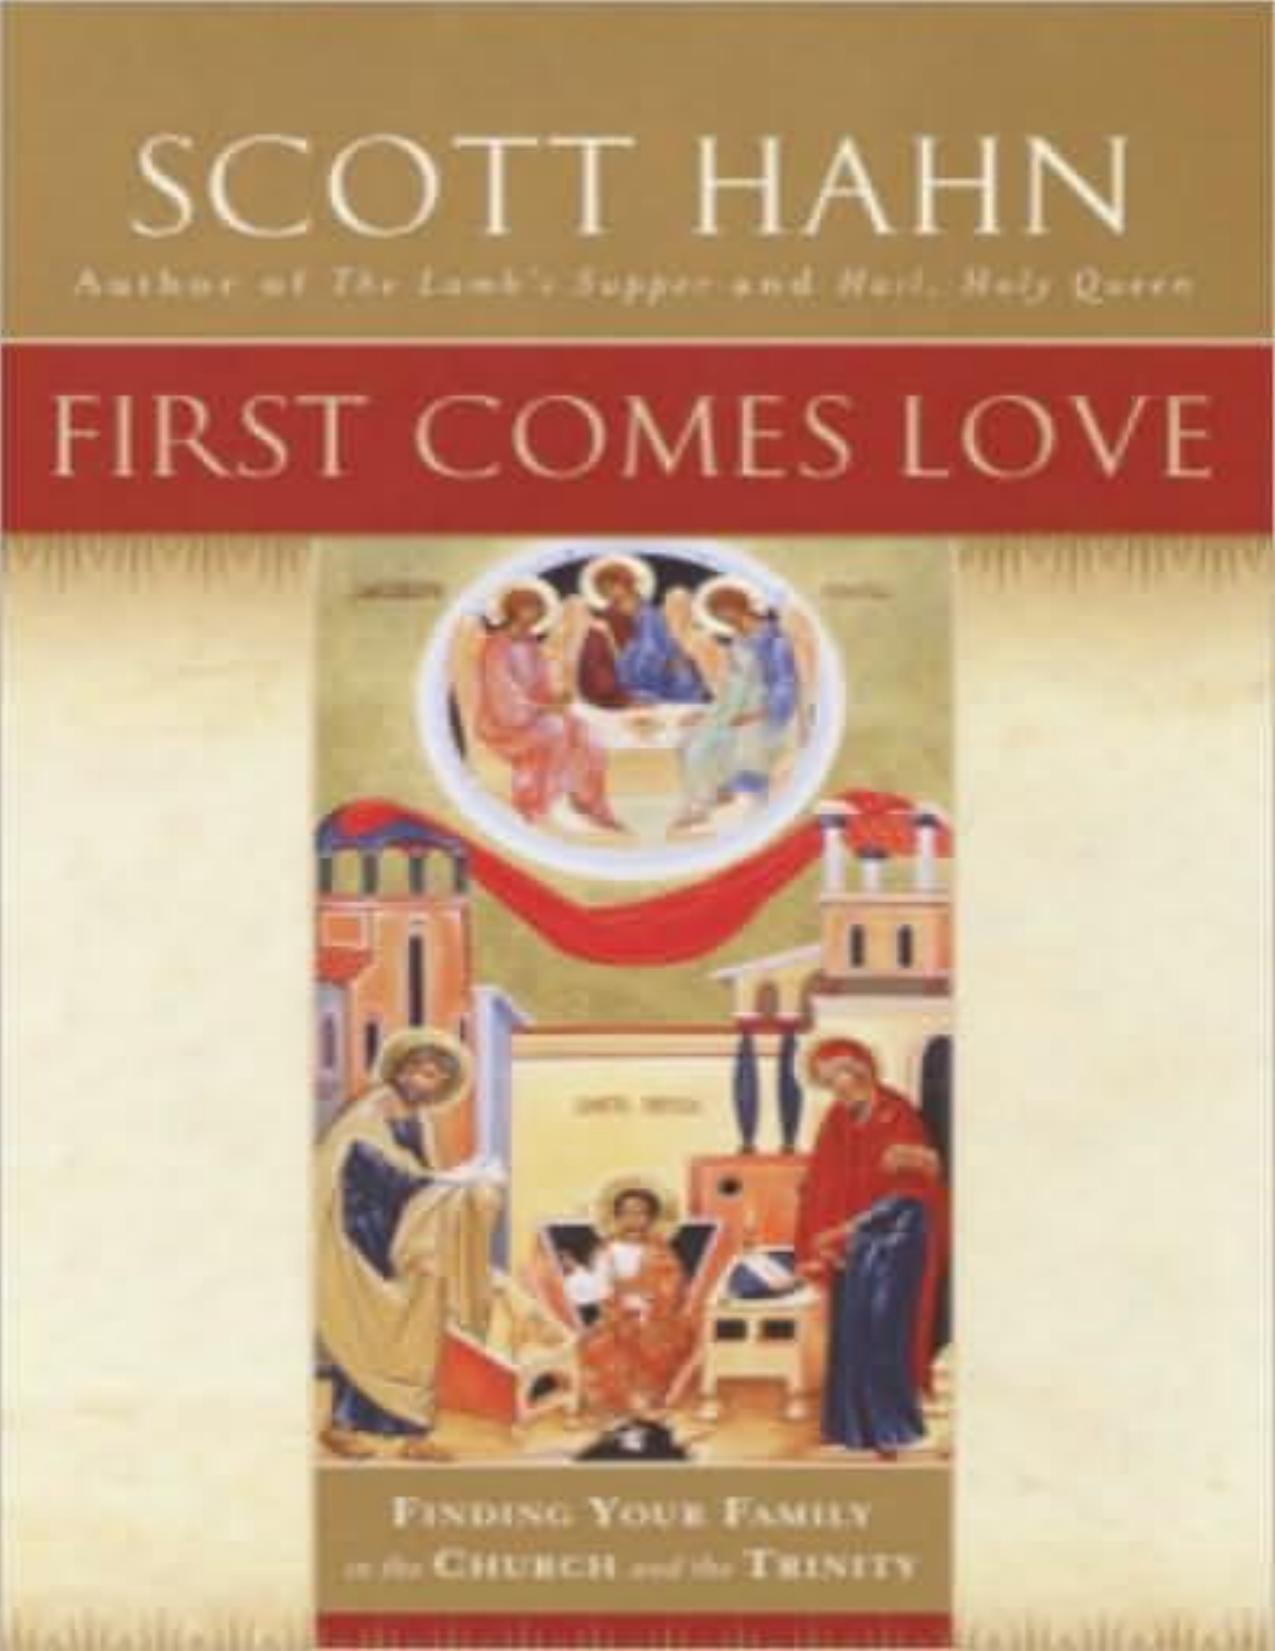 First Comes Love: The Family in the Church and the Trinity by Scott Hahn